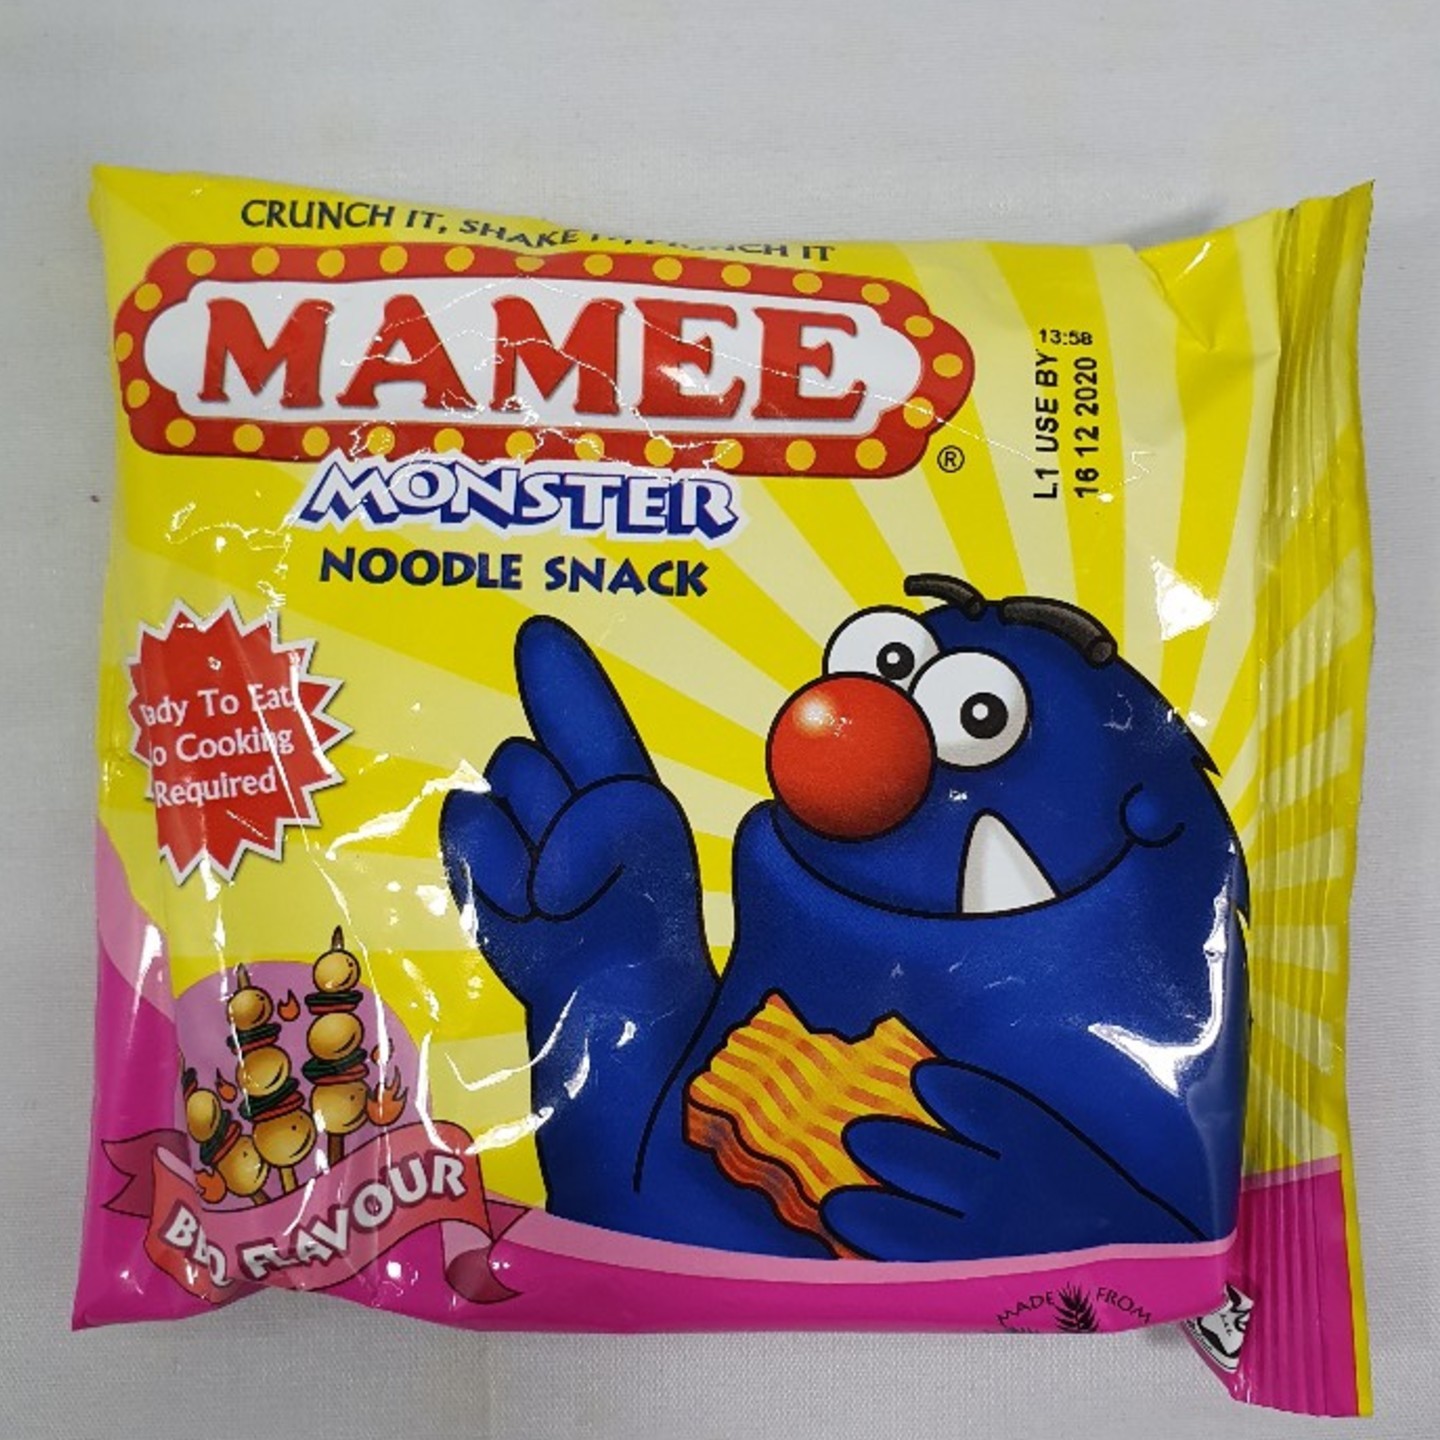 Mamee Monster Noodle (BBQ)